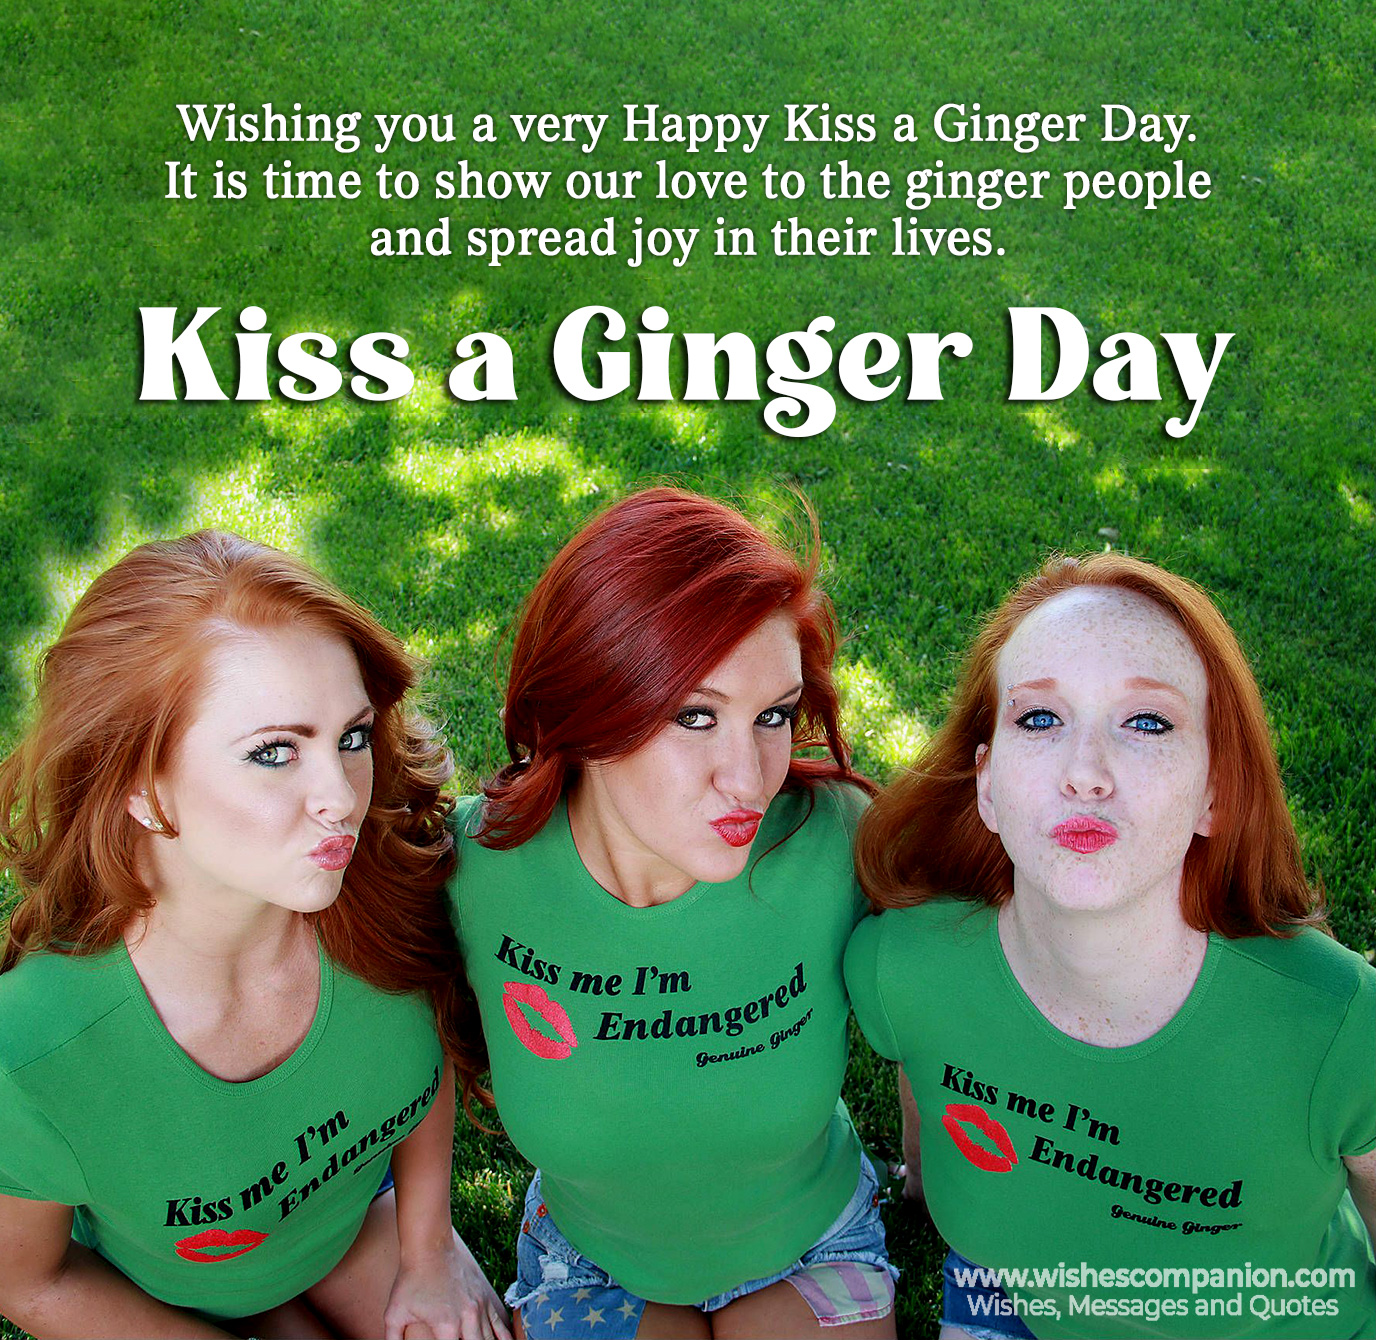 National Kiss a Ginger Day Wishes, Messages and images